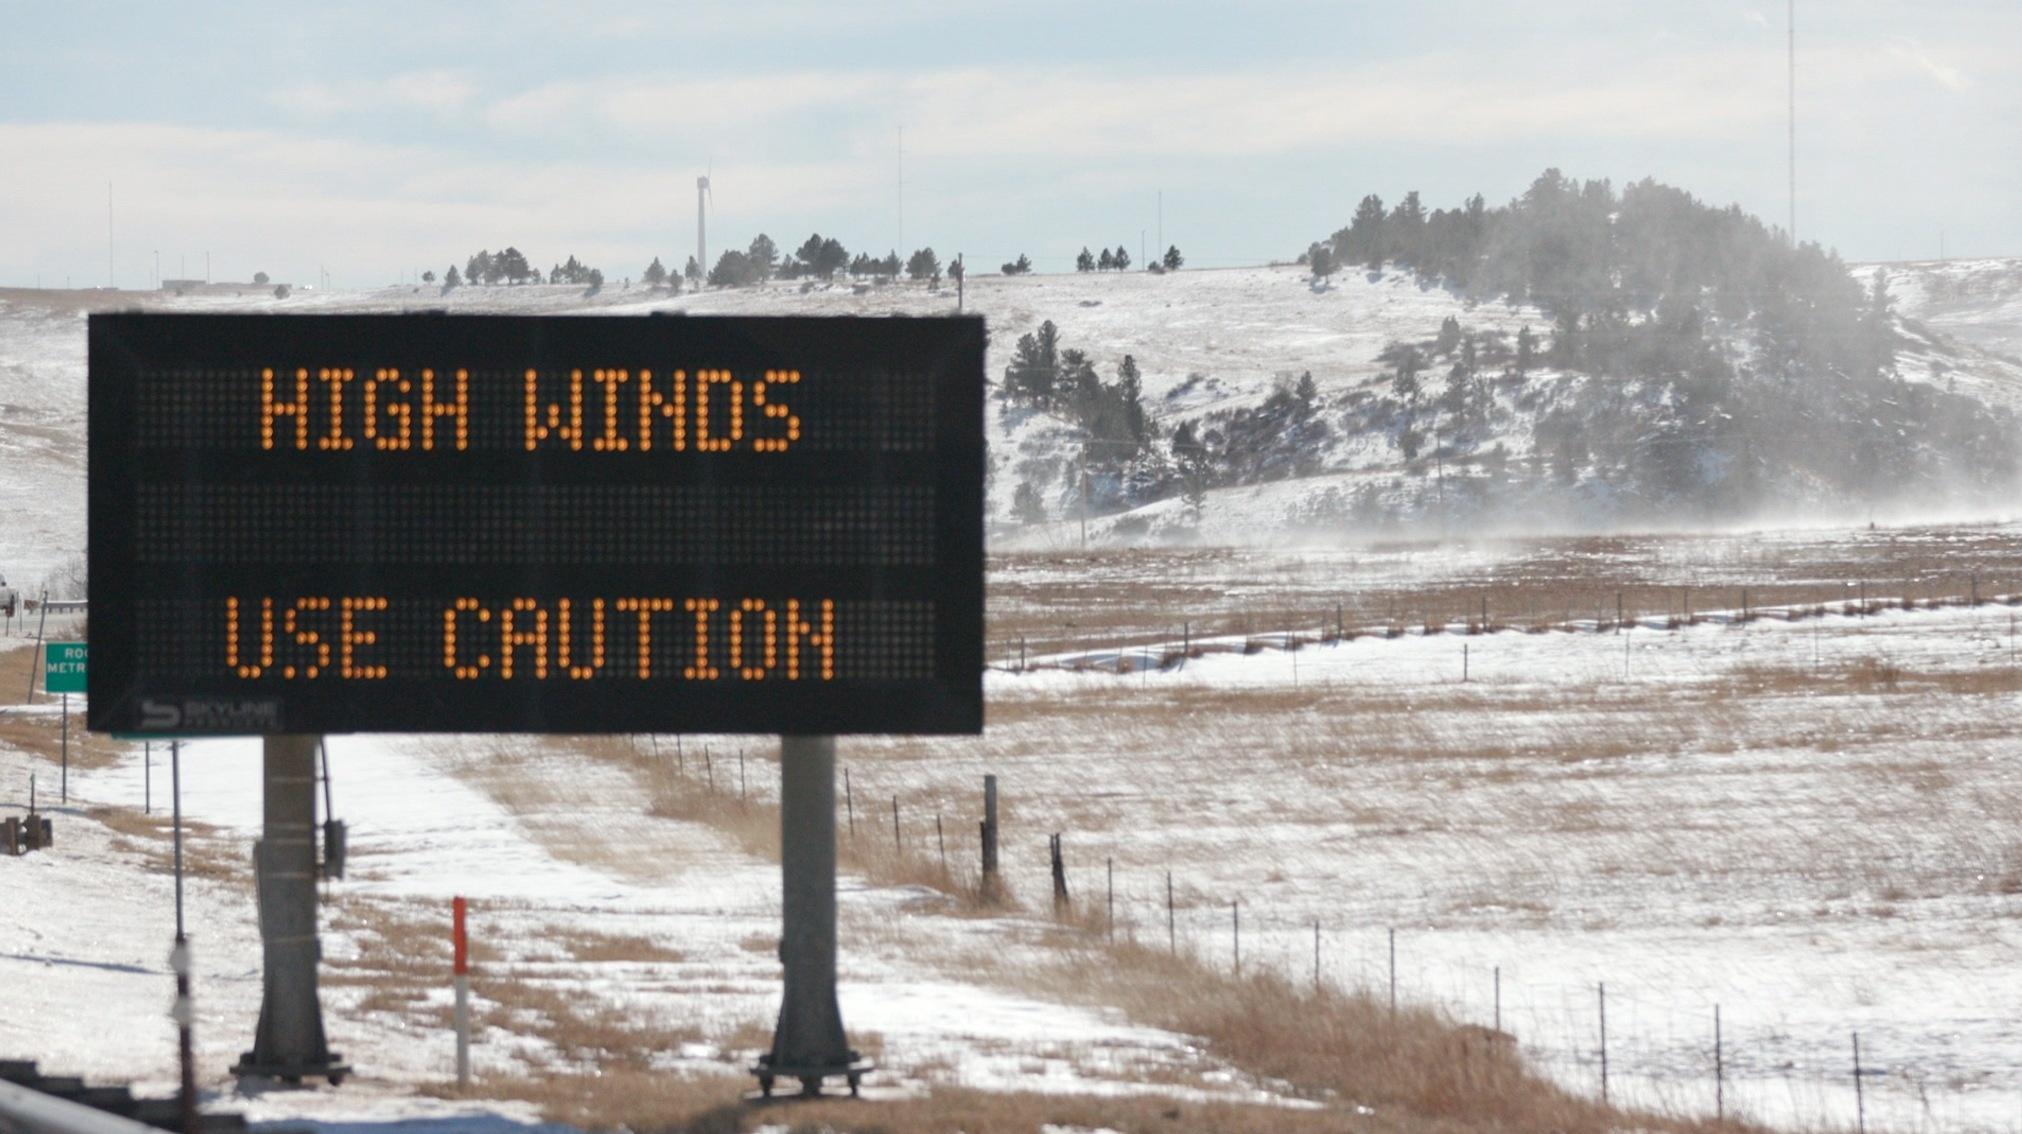 High winds are not unusual in the Colorado winter, but they become especially worrisome when paired with drought and fire.